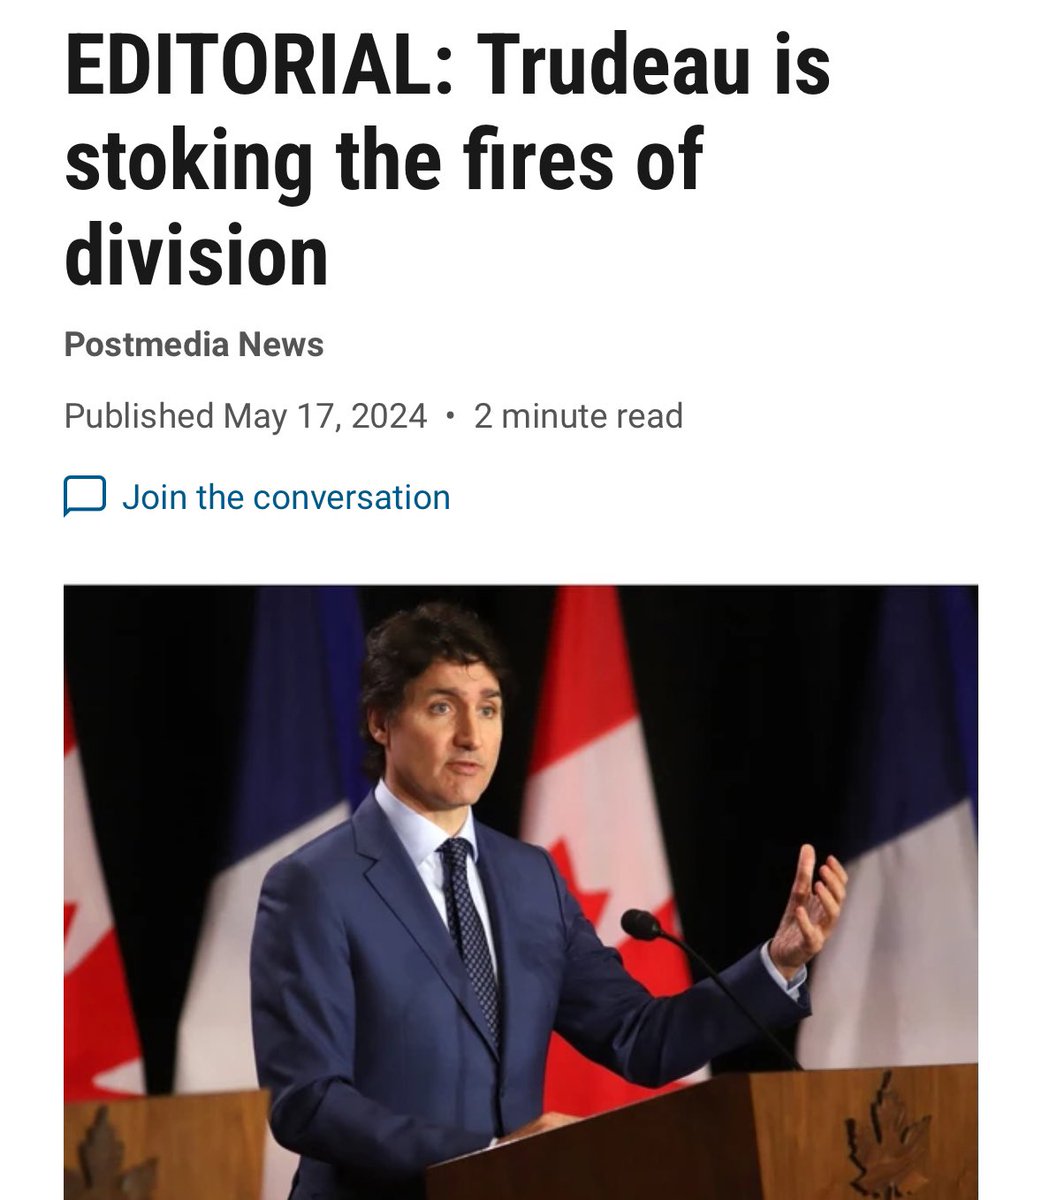 🇨🇦Trudeau lately has attacked with words far worse than Pierre’s “wacko” Comment: Scott Moe Daniel Smith Blaine Higgs He is such a disgrace.🤦🏻‍♂️ Please resign! saultstar.com/opinion/editor…